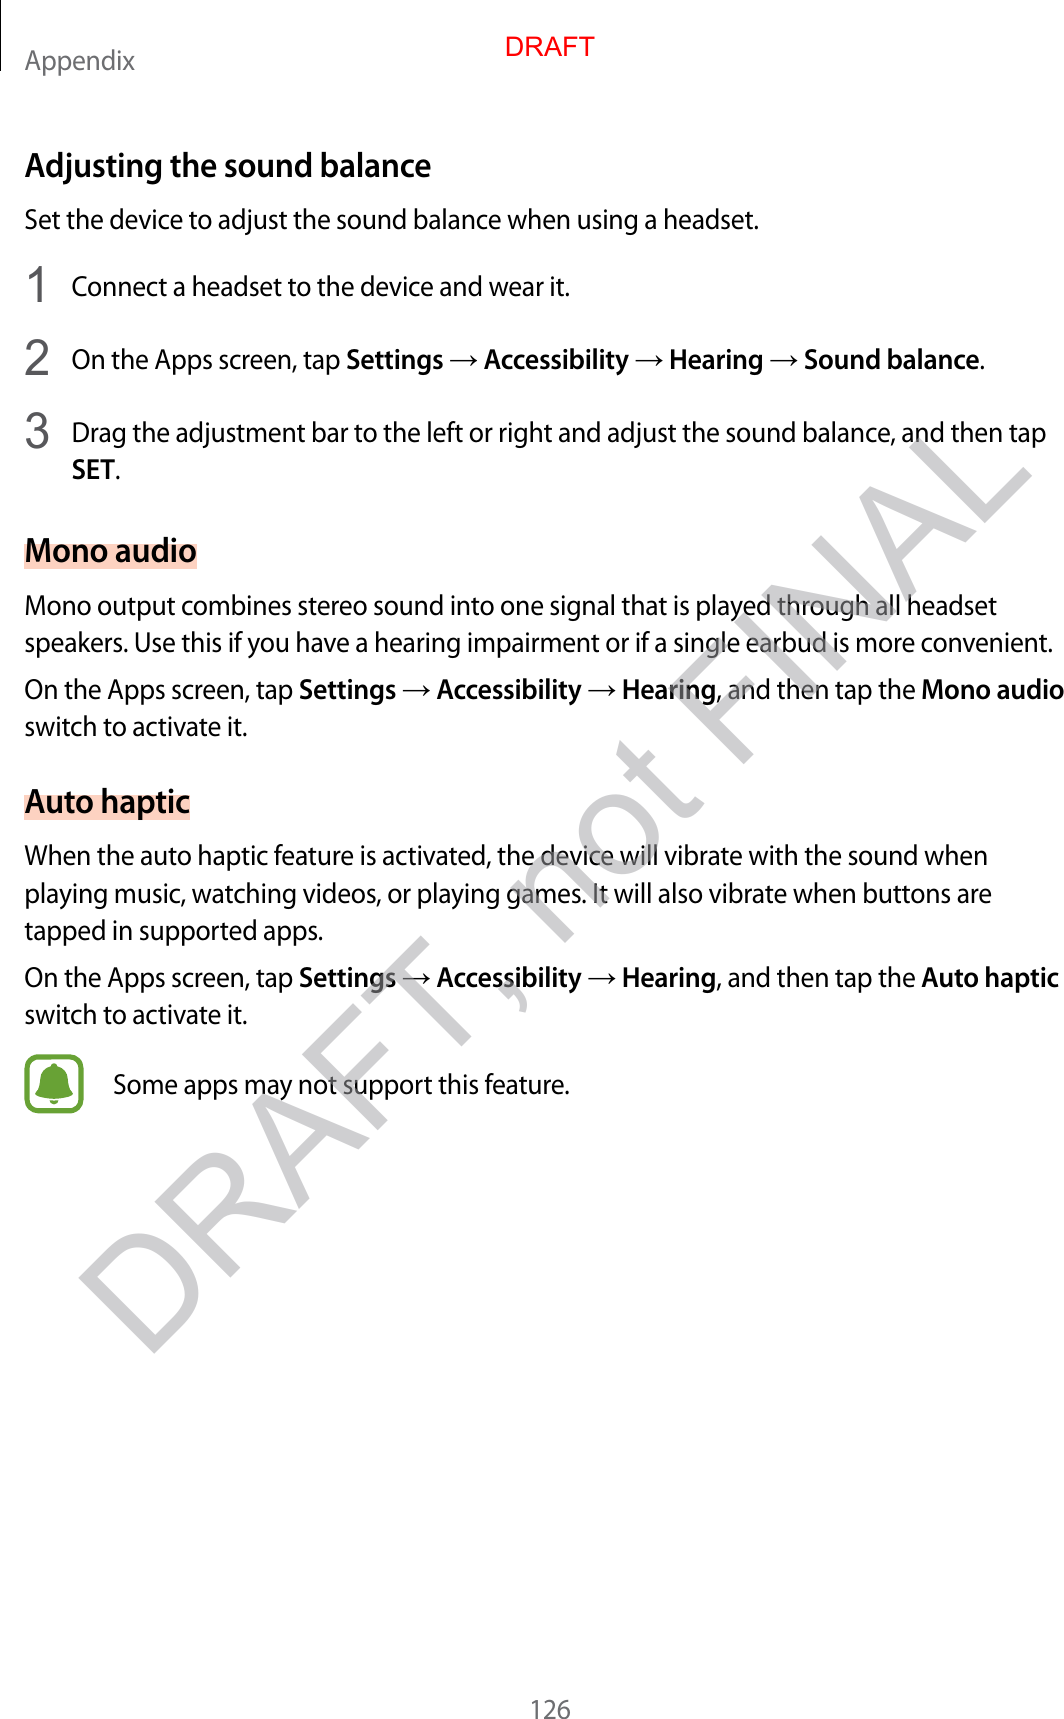 Appendix126Adjusting the sound balanc eSet the device to adjust the sound balance when using a headset.1  Connect a headset to the device and w ear it.2  On the Apps screen, tap Settings  Accessibility  Hearing  Sound balance.3  Drag the adjustment bar to the left or right and adjust the sound balance , and then tap SET.Mono audioMono output combines stereo sound in to one sig nal that is pla y ed thr ough all headset speakers. Use this if y ou ha v e a hearing impairment or if a single earbud is more c on v enien t.On the Apps screen, tap Settings  Accessibility  Hearing, and then tap the Mono audio switch to activate it.Aut o hapticWhen the auto haptic f ea tur e is activated , the device will vibr at e with the sound when playing music , wat ching videos , or pla ying games . It will also vibrate when buttons ar e tapped in supported apps.On the Apps screen, tap Settings  Accessibility  Hearing, and then tap the Aut o haptic switch to activate it.Some apps may not support this fea tur e .DRAFTDRAFT, not FINAL